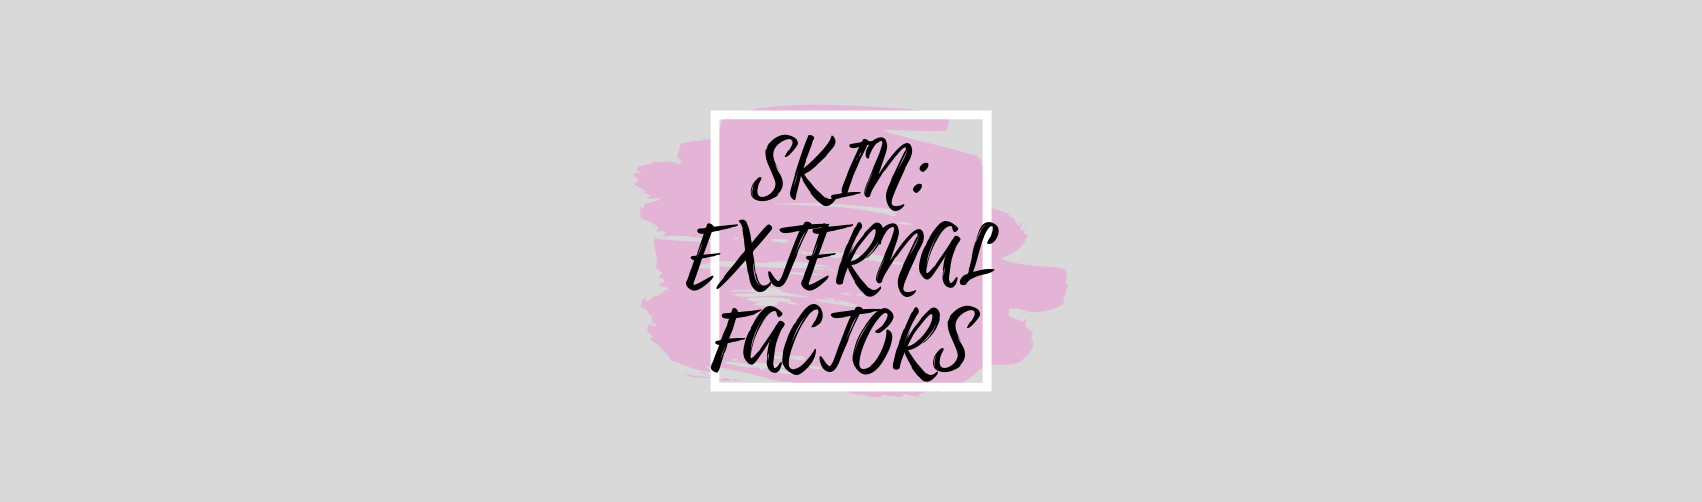 External factors that can affect your skin.